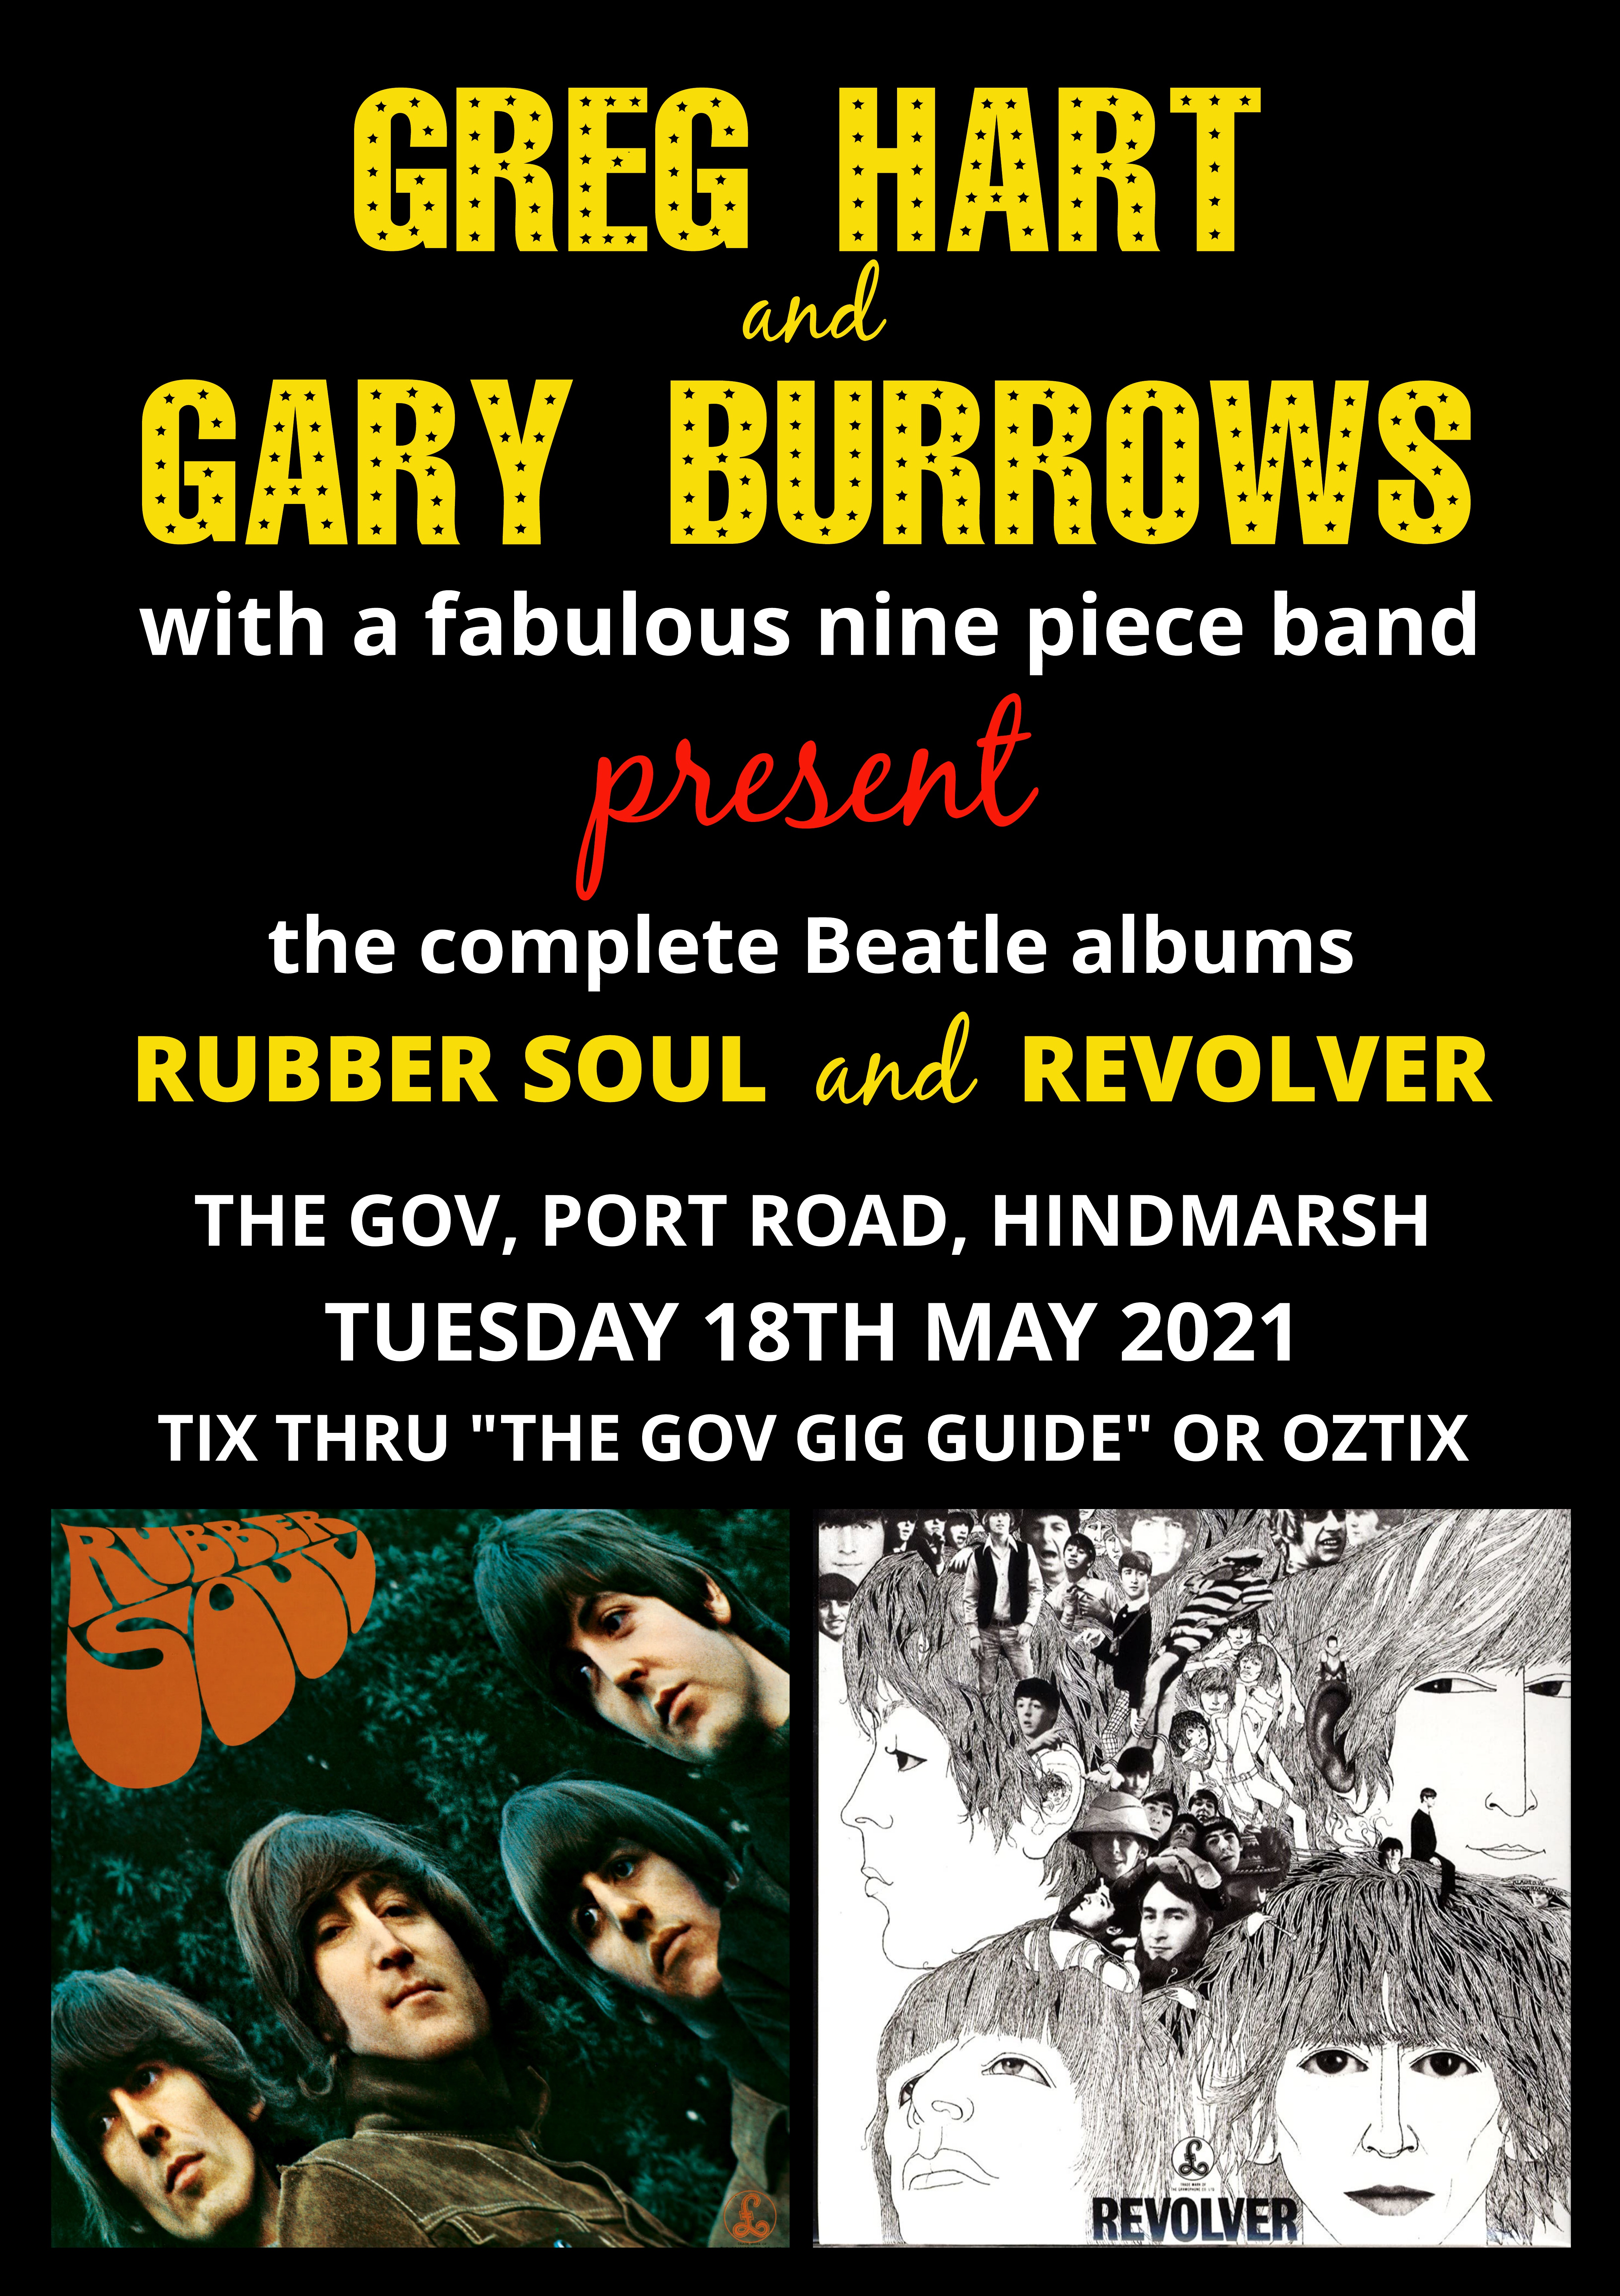 The Beatles – Rubber Soul and Revolver Albums